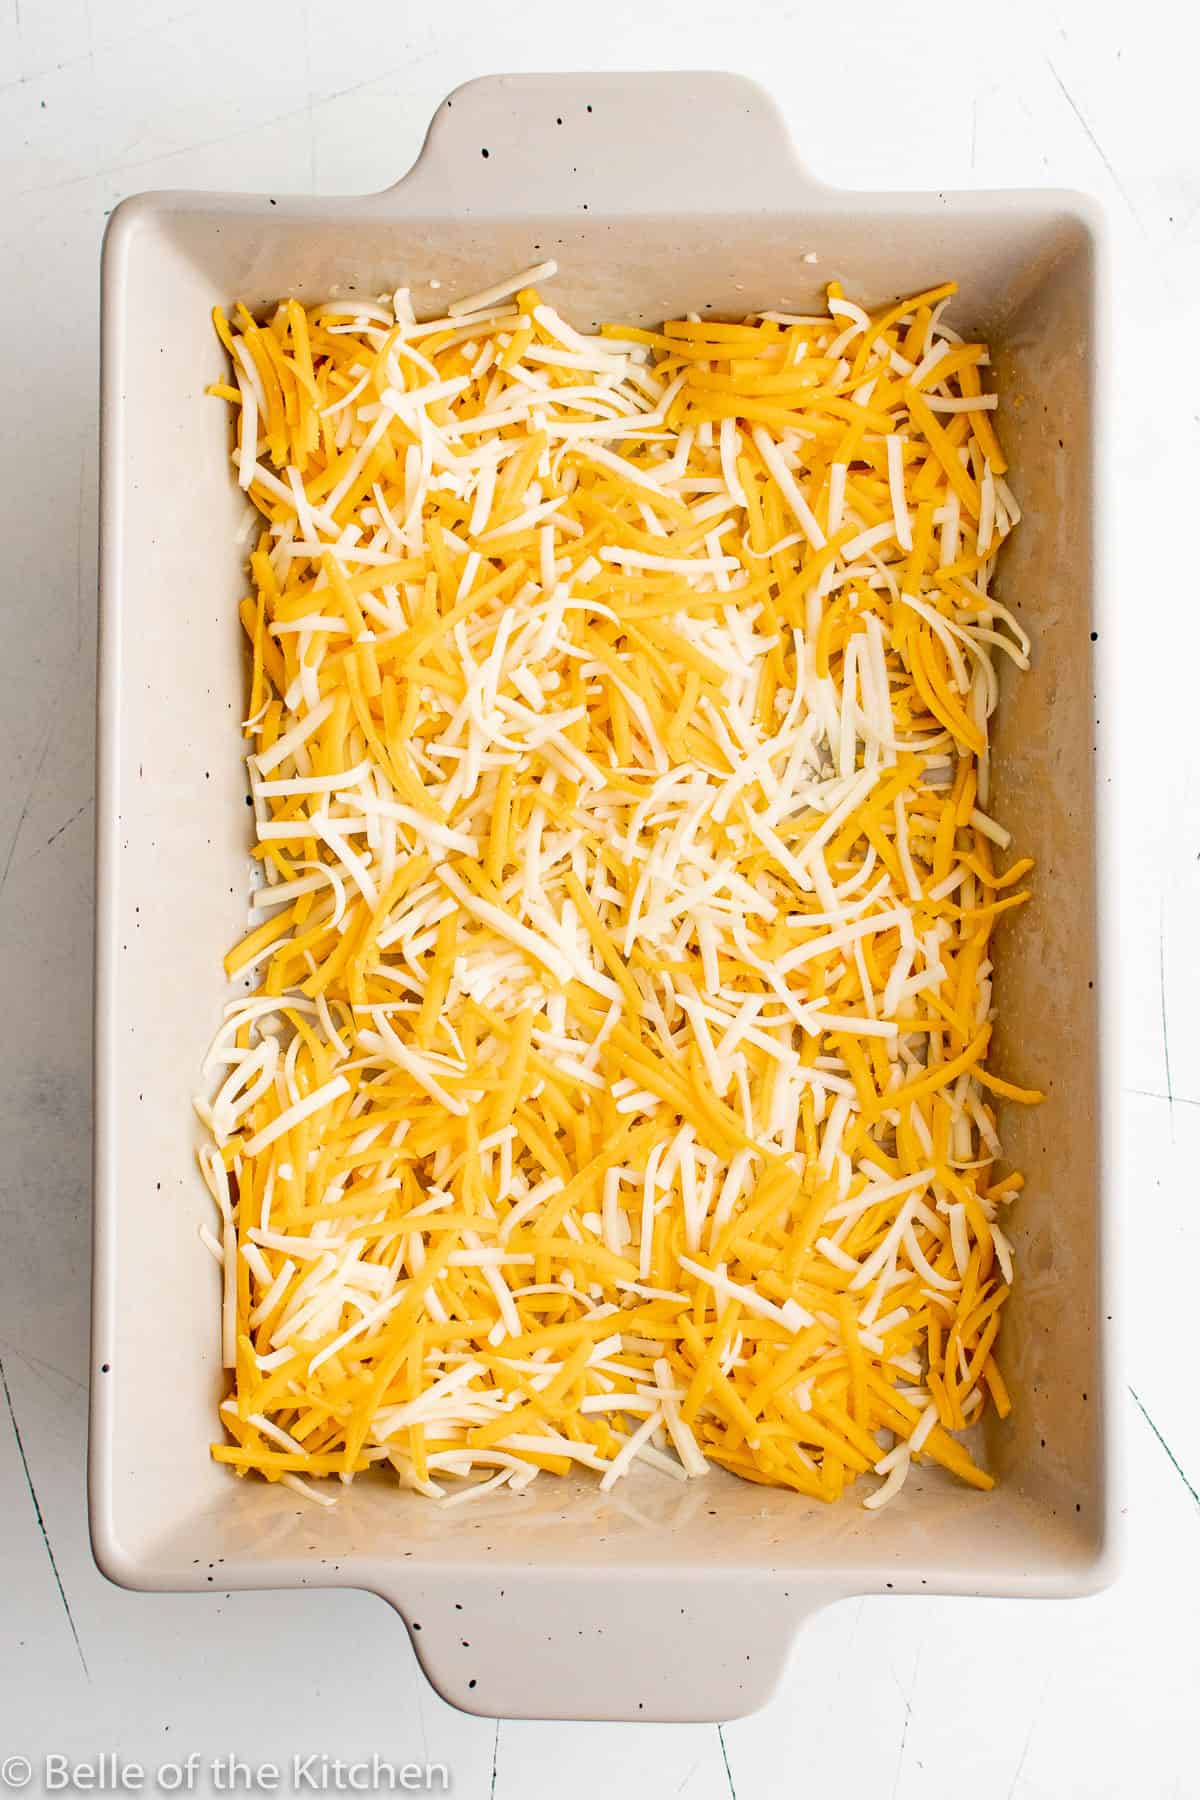 a baking dish full of cheese.